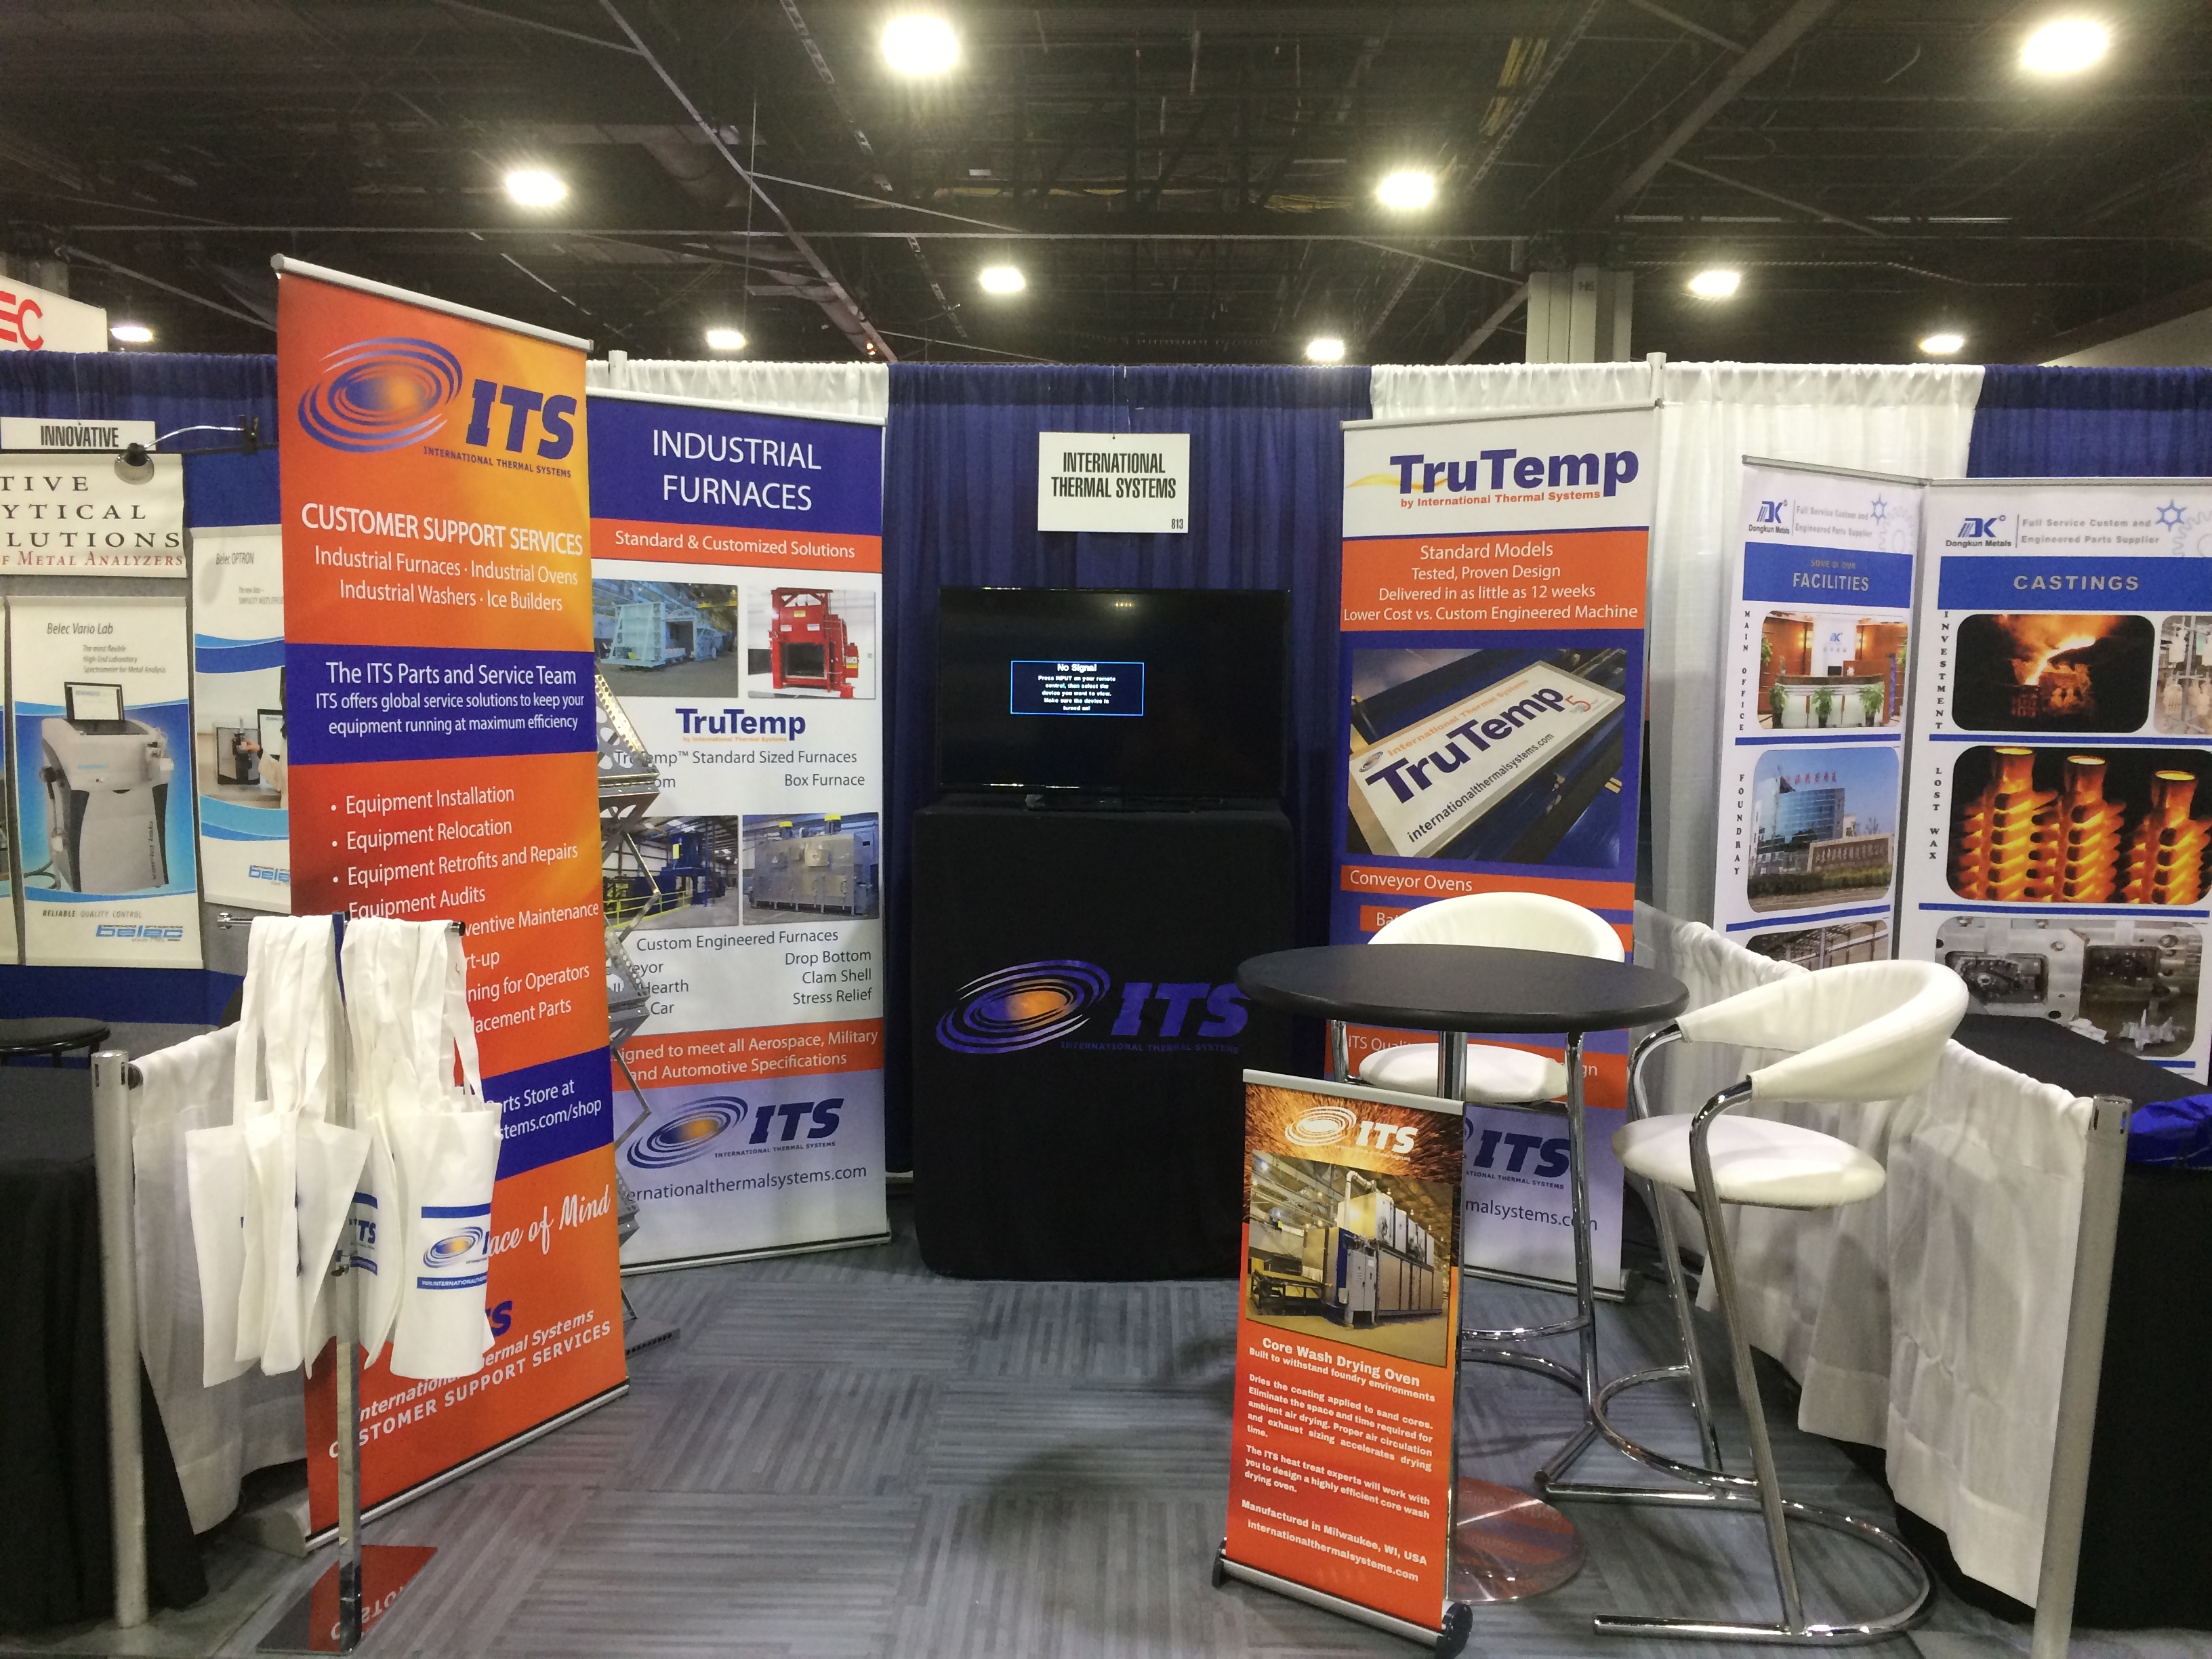 Cast Expo is underway! Stop by Booth 813 International Thermal Systems